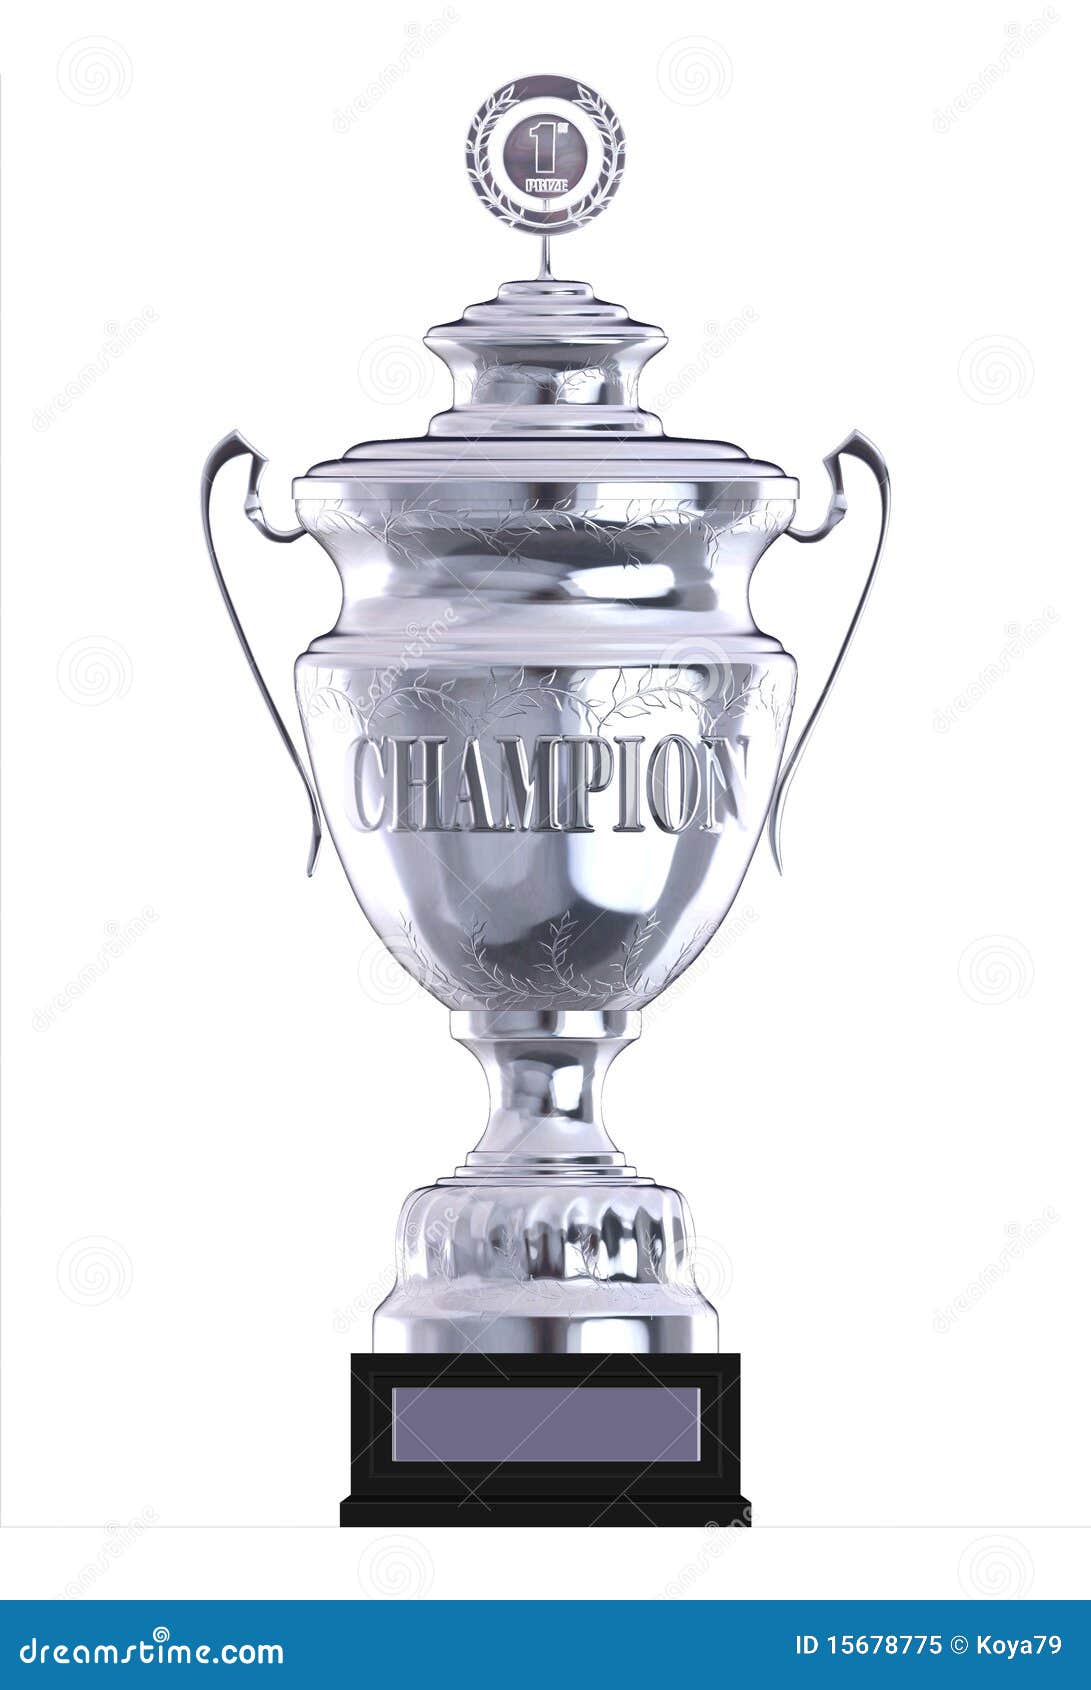 FREE Engraving 466D gw 300mm Equity Silver Cup  Award Trophy,Multisport 